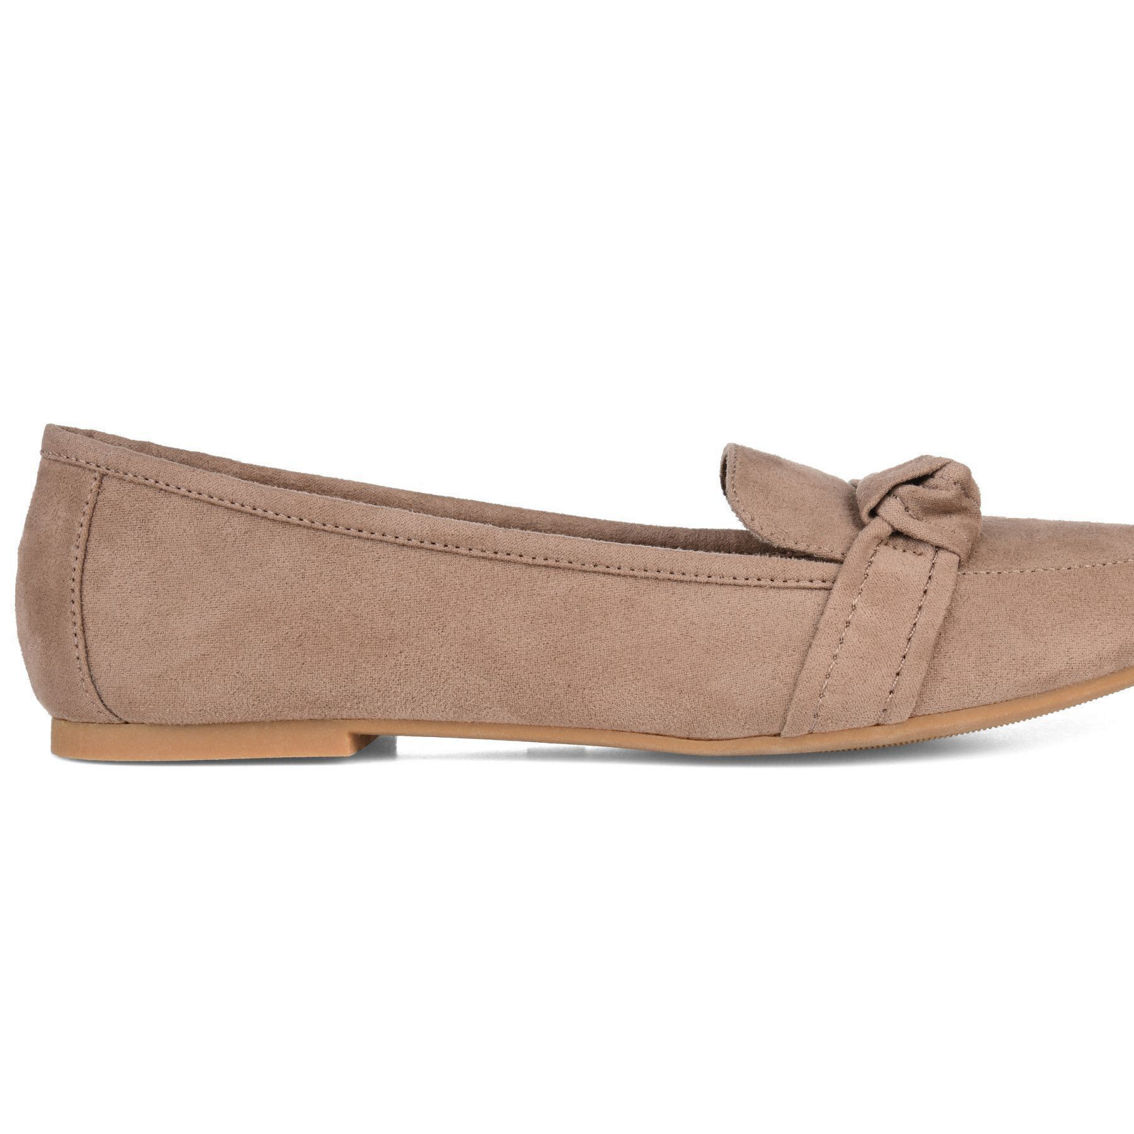 Journee Collection Women's Marci Flat - Image 4 of 5